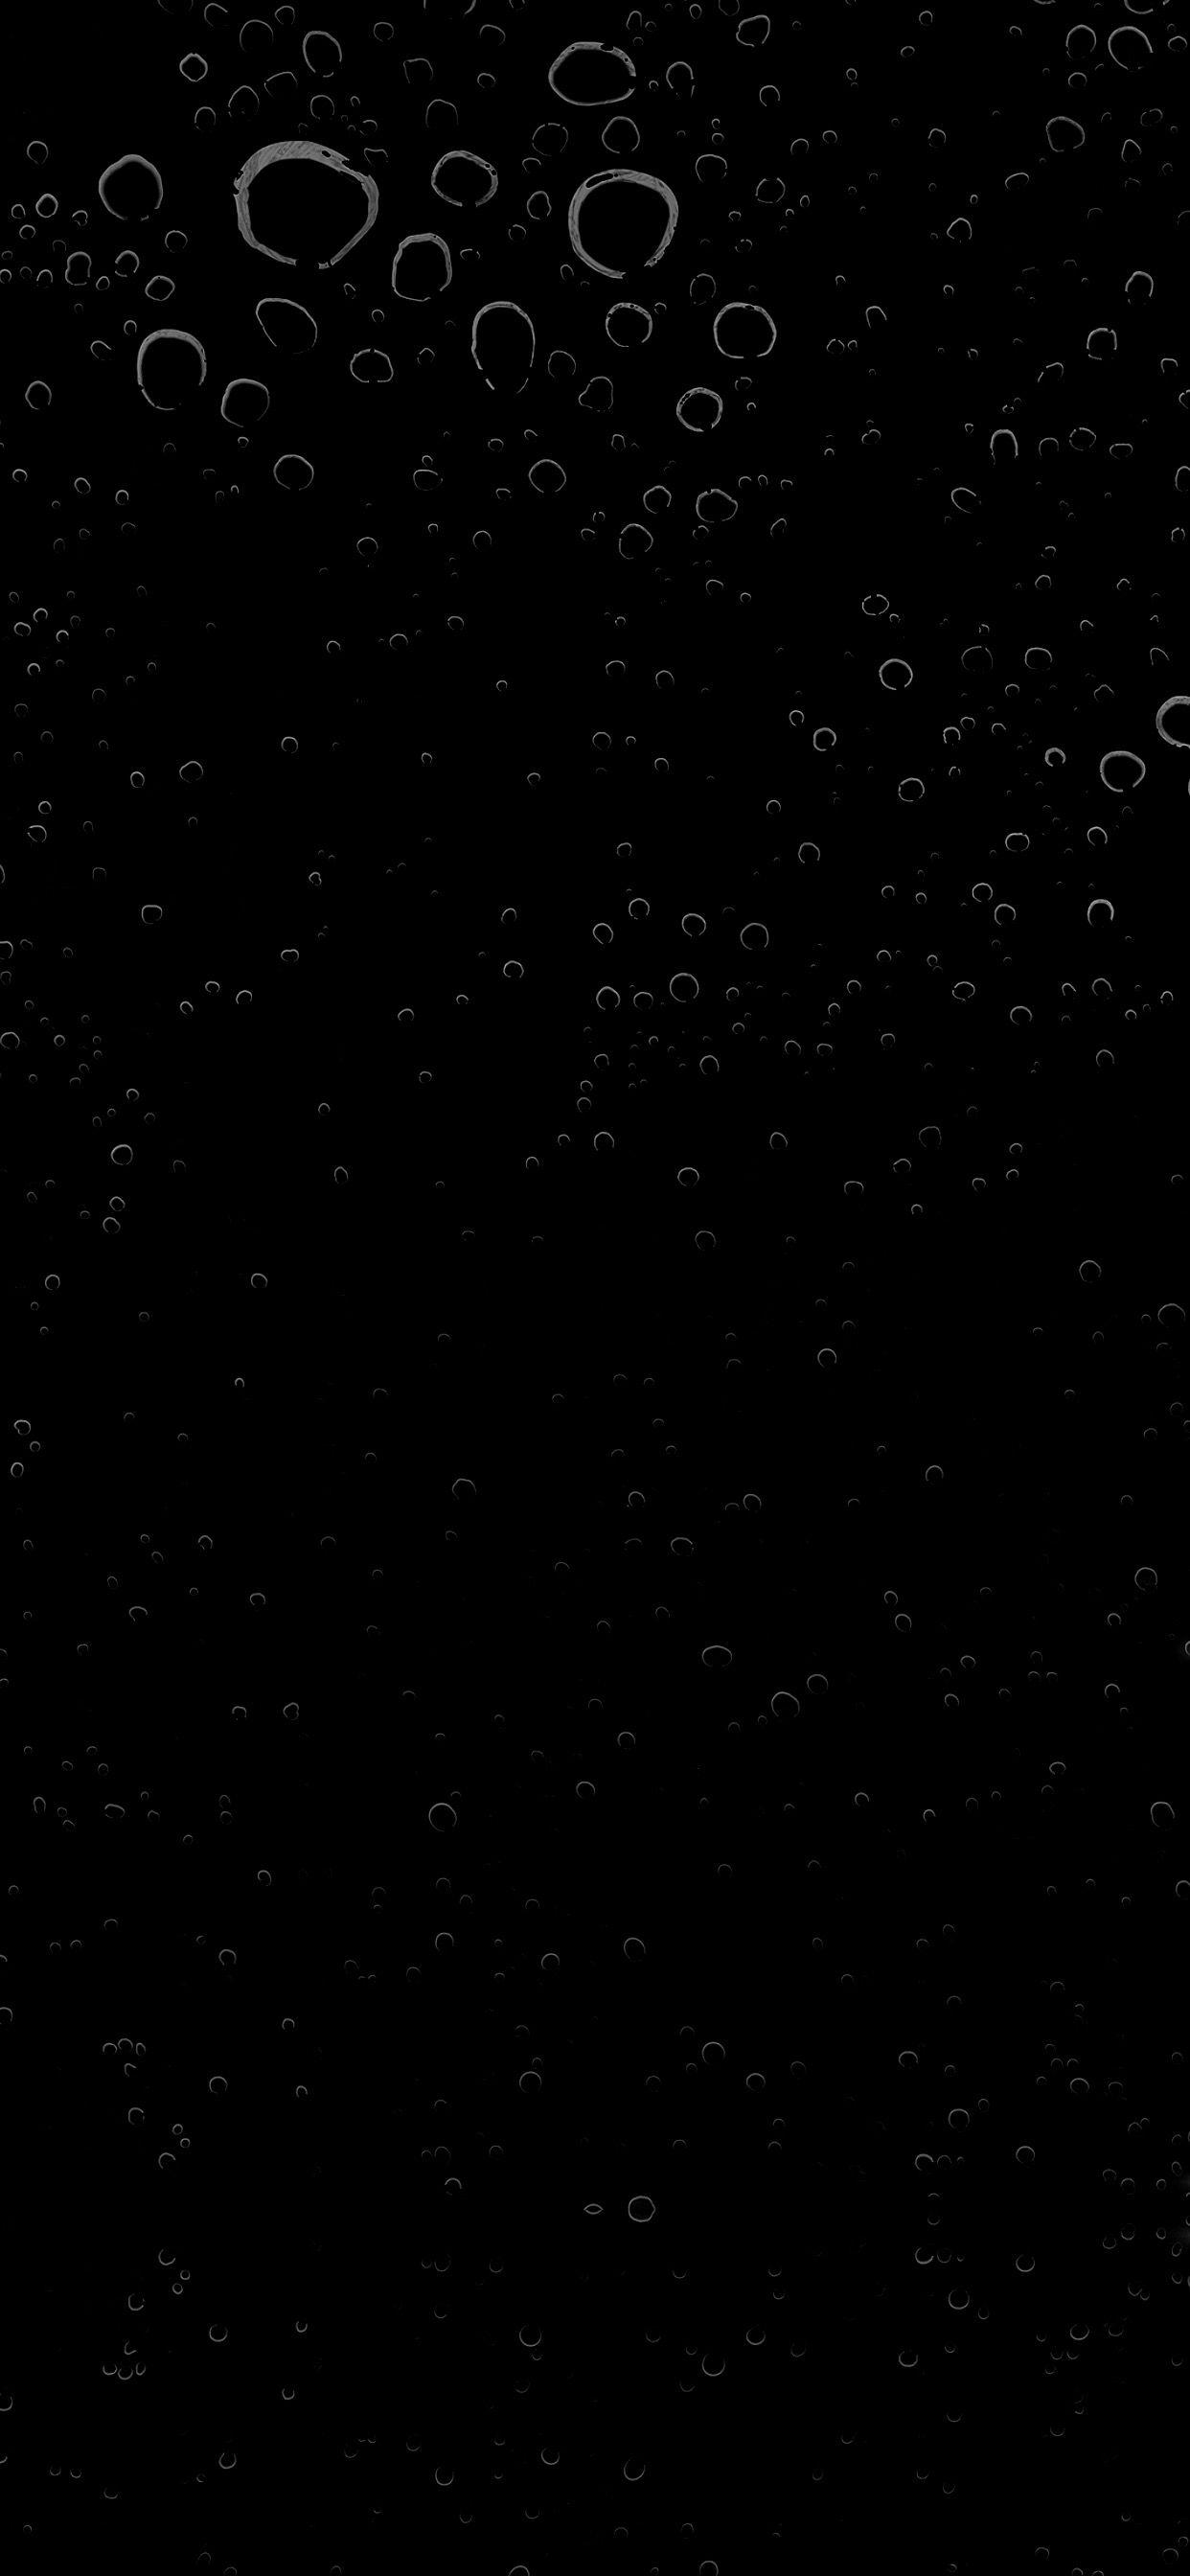 Black wallpapers for desktop, download free Black pictures and backgrounds  for PC | mob.org